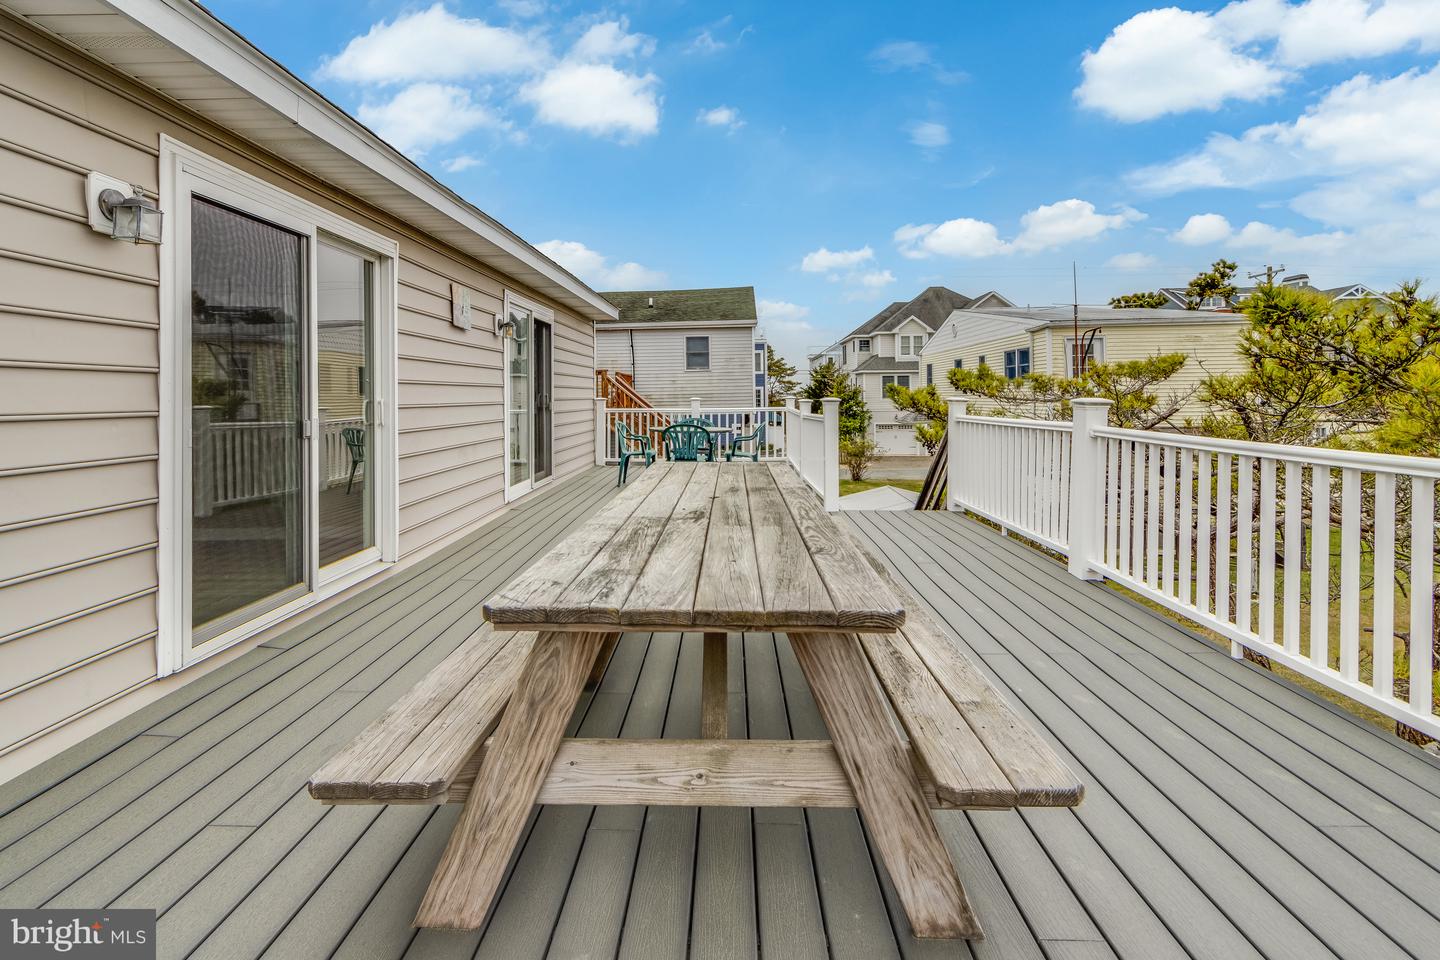 DESU2060190-803009595814-2024-04-21-00-08-05 35205 Hassell Ave | Bethany Beach, DE Real Estate For Sale | MLS# Desu2060190  - 1st Choice Properties